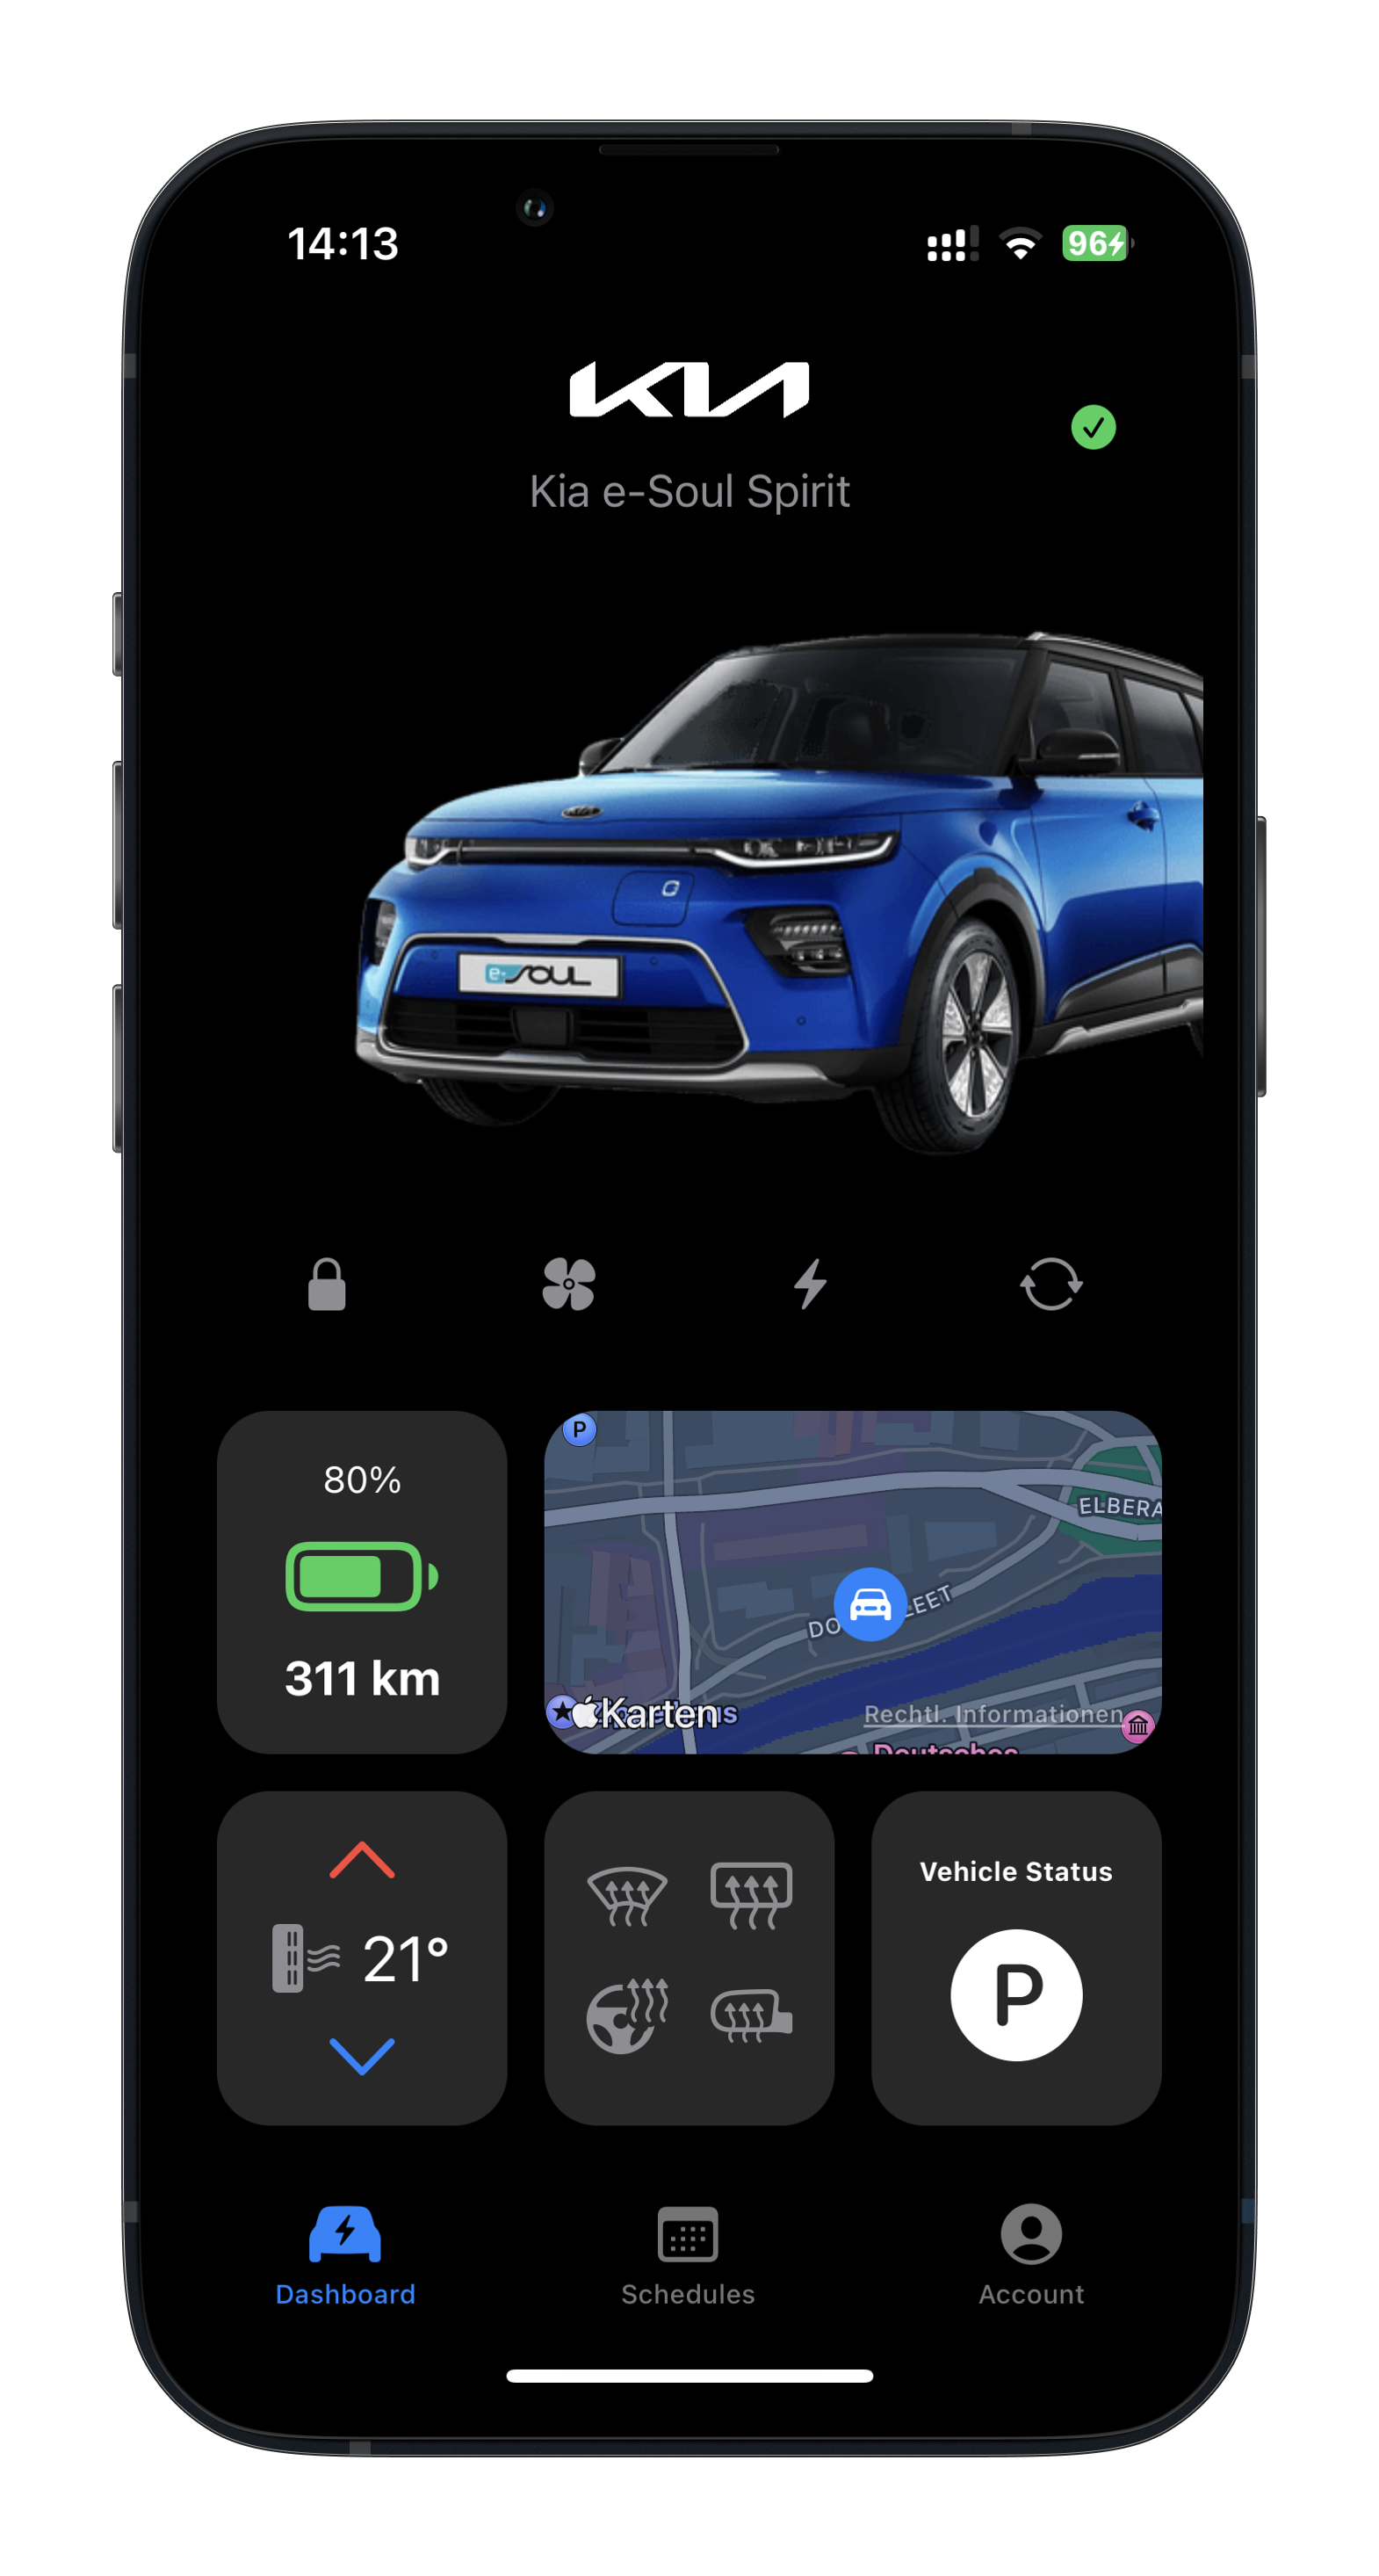 Screenshot of the Sparky iOS app, which is displaying information about the Kia e-Soul